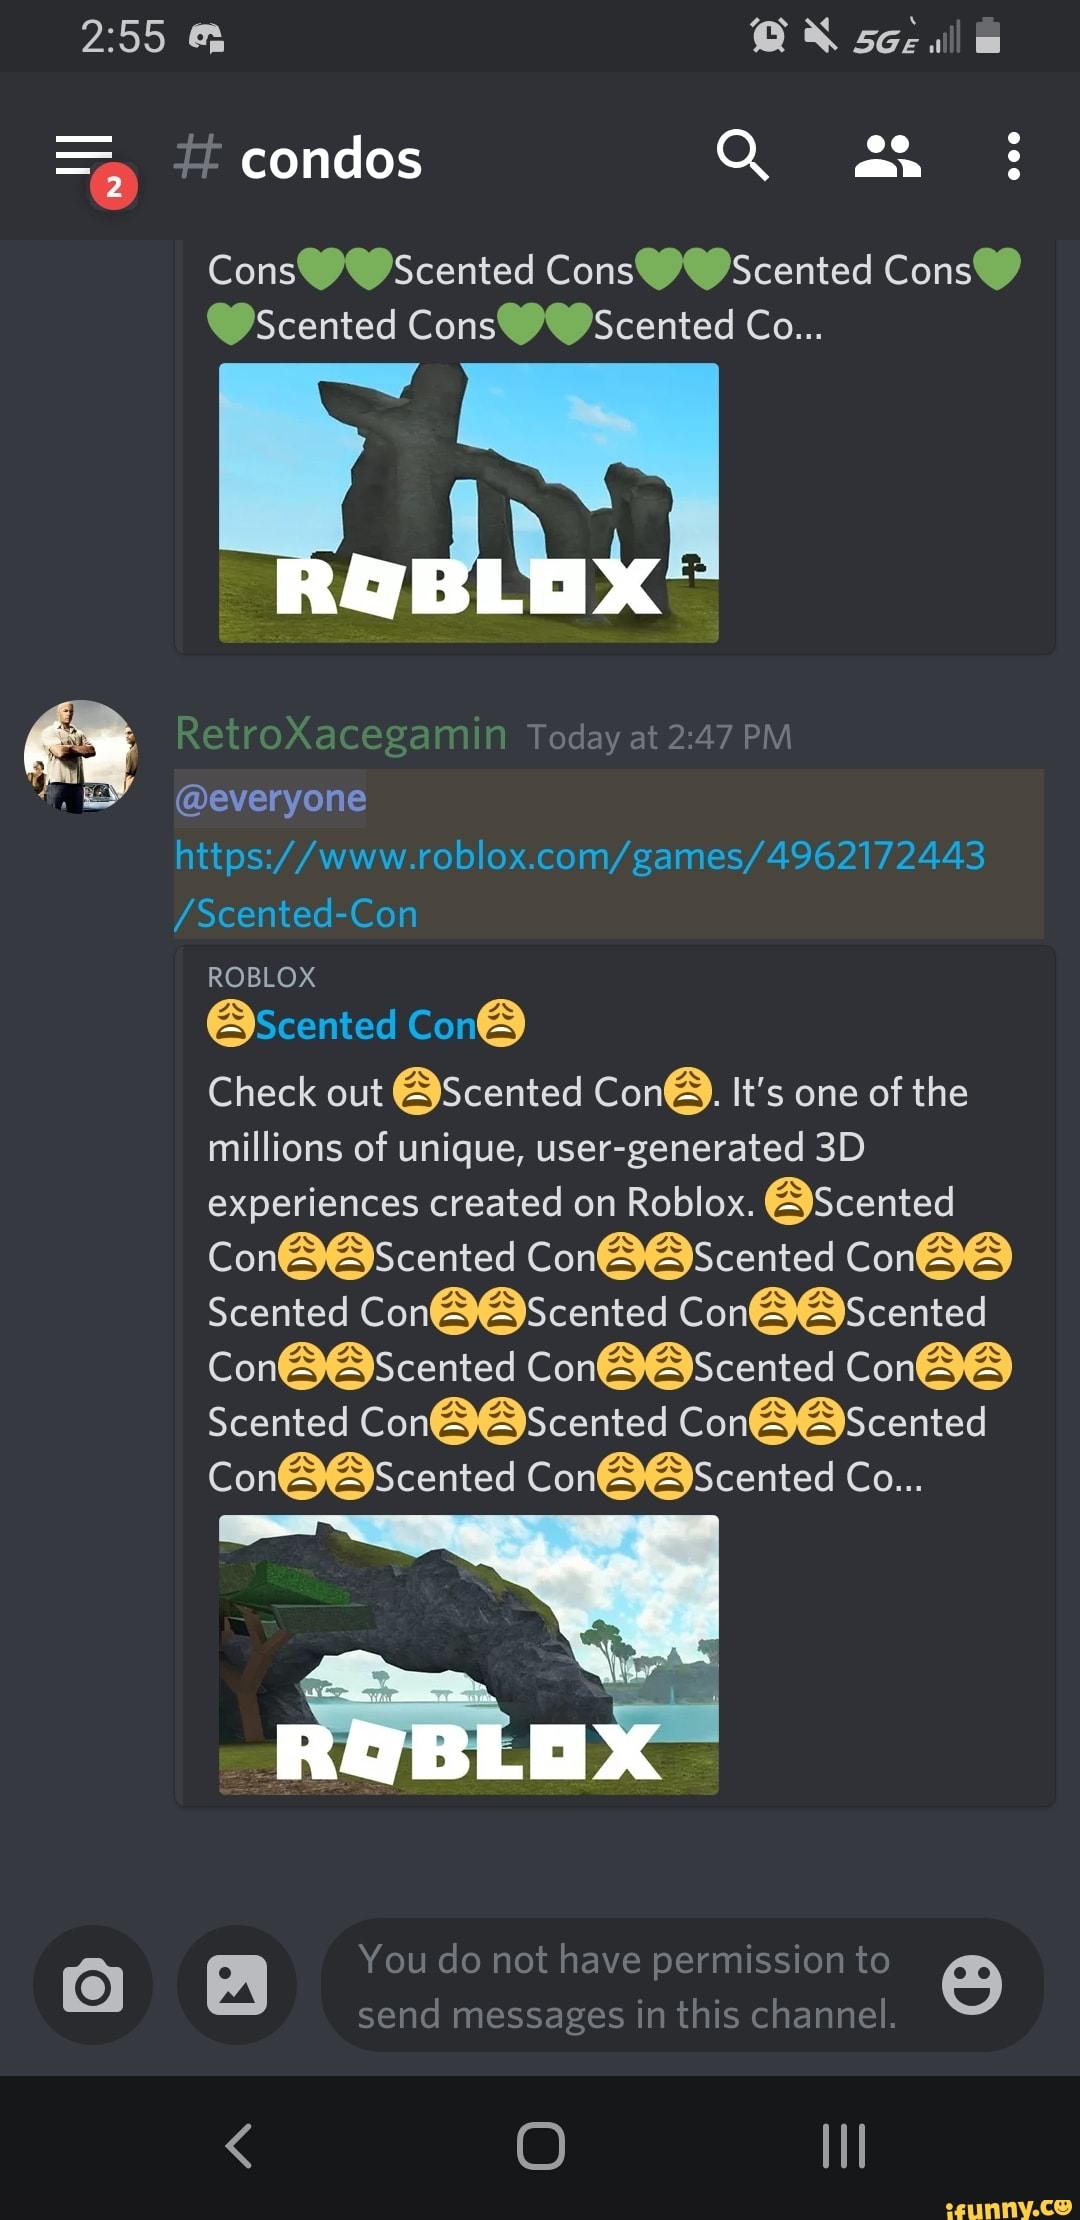 How to Find Condos & Scented Con Games in Roblox that WORKS! 